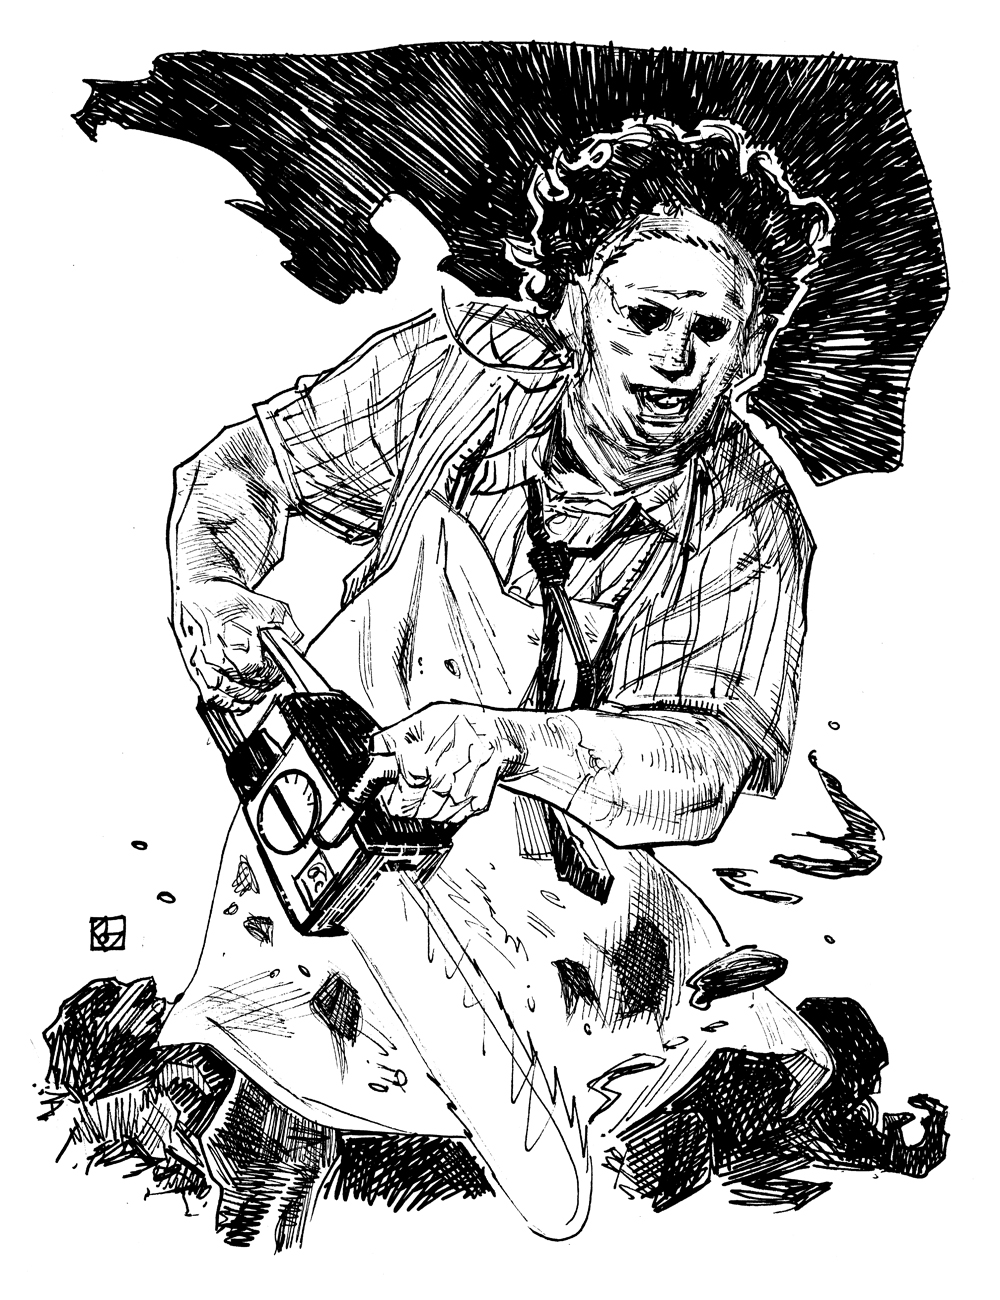 1000x1300 leatherface drawing chainsaw massacre for free download - Chainsa...